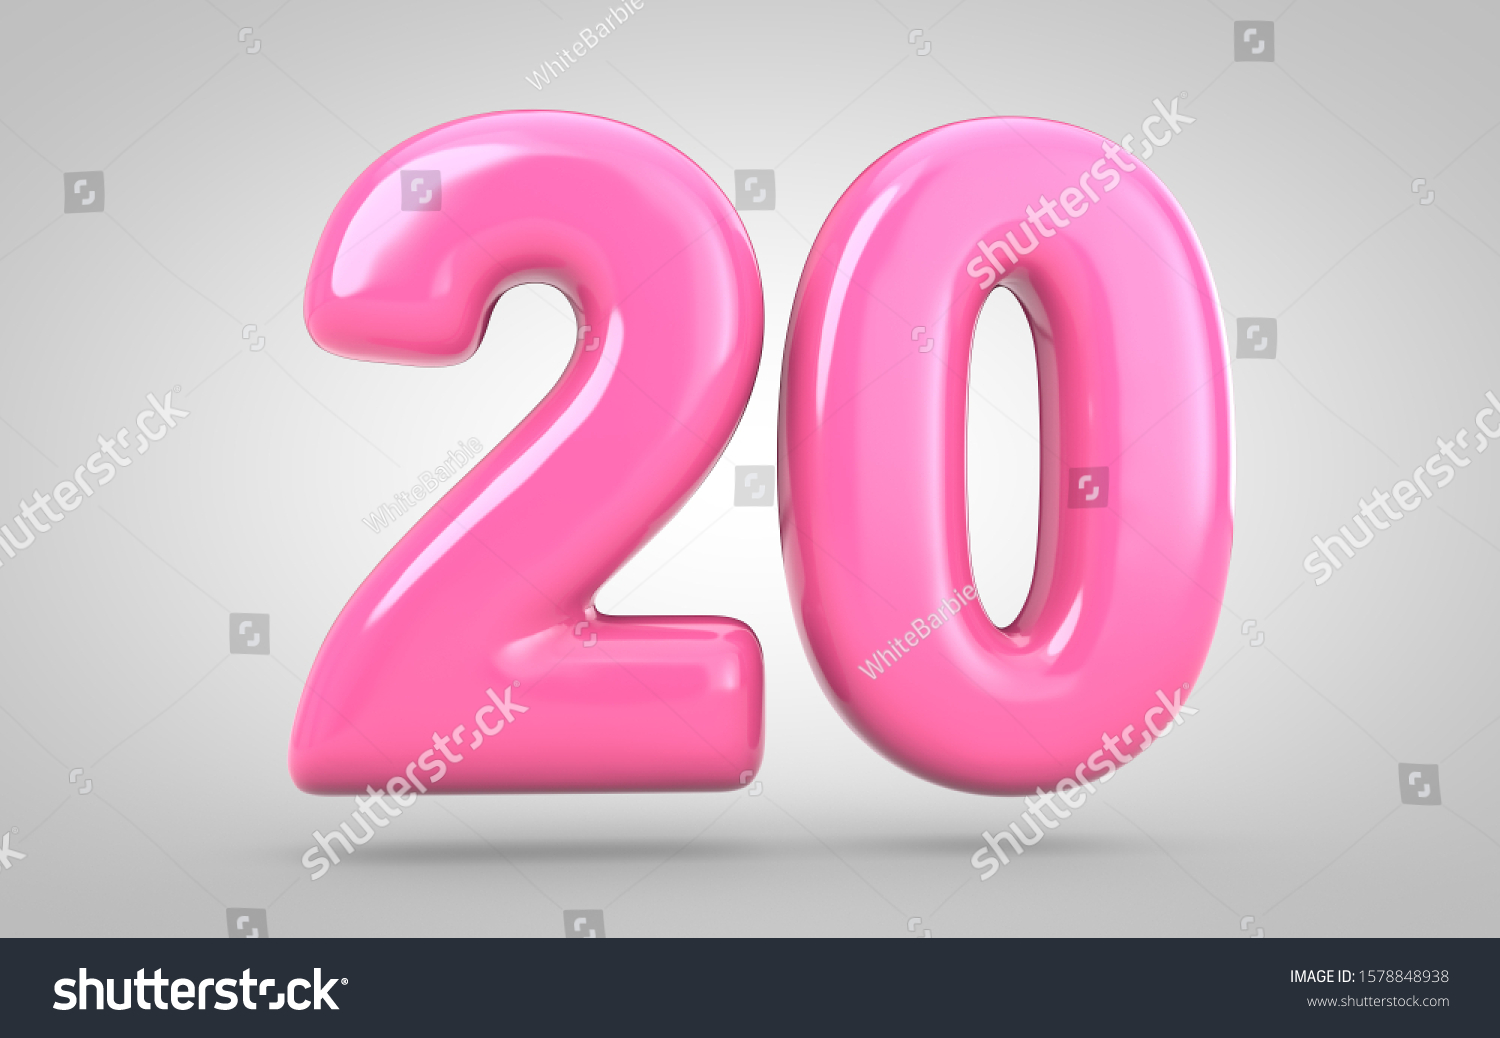 Bubble Gum Number 20 Isolated On Stock Illustration 1578848938 ...